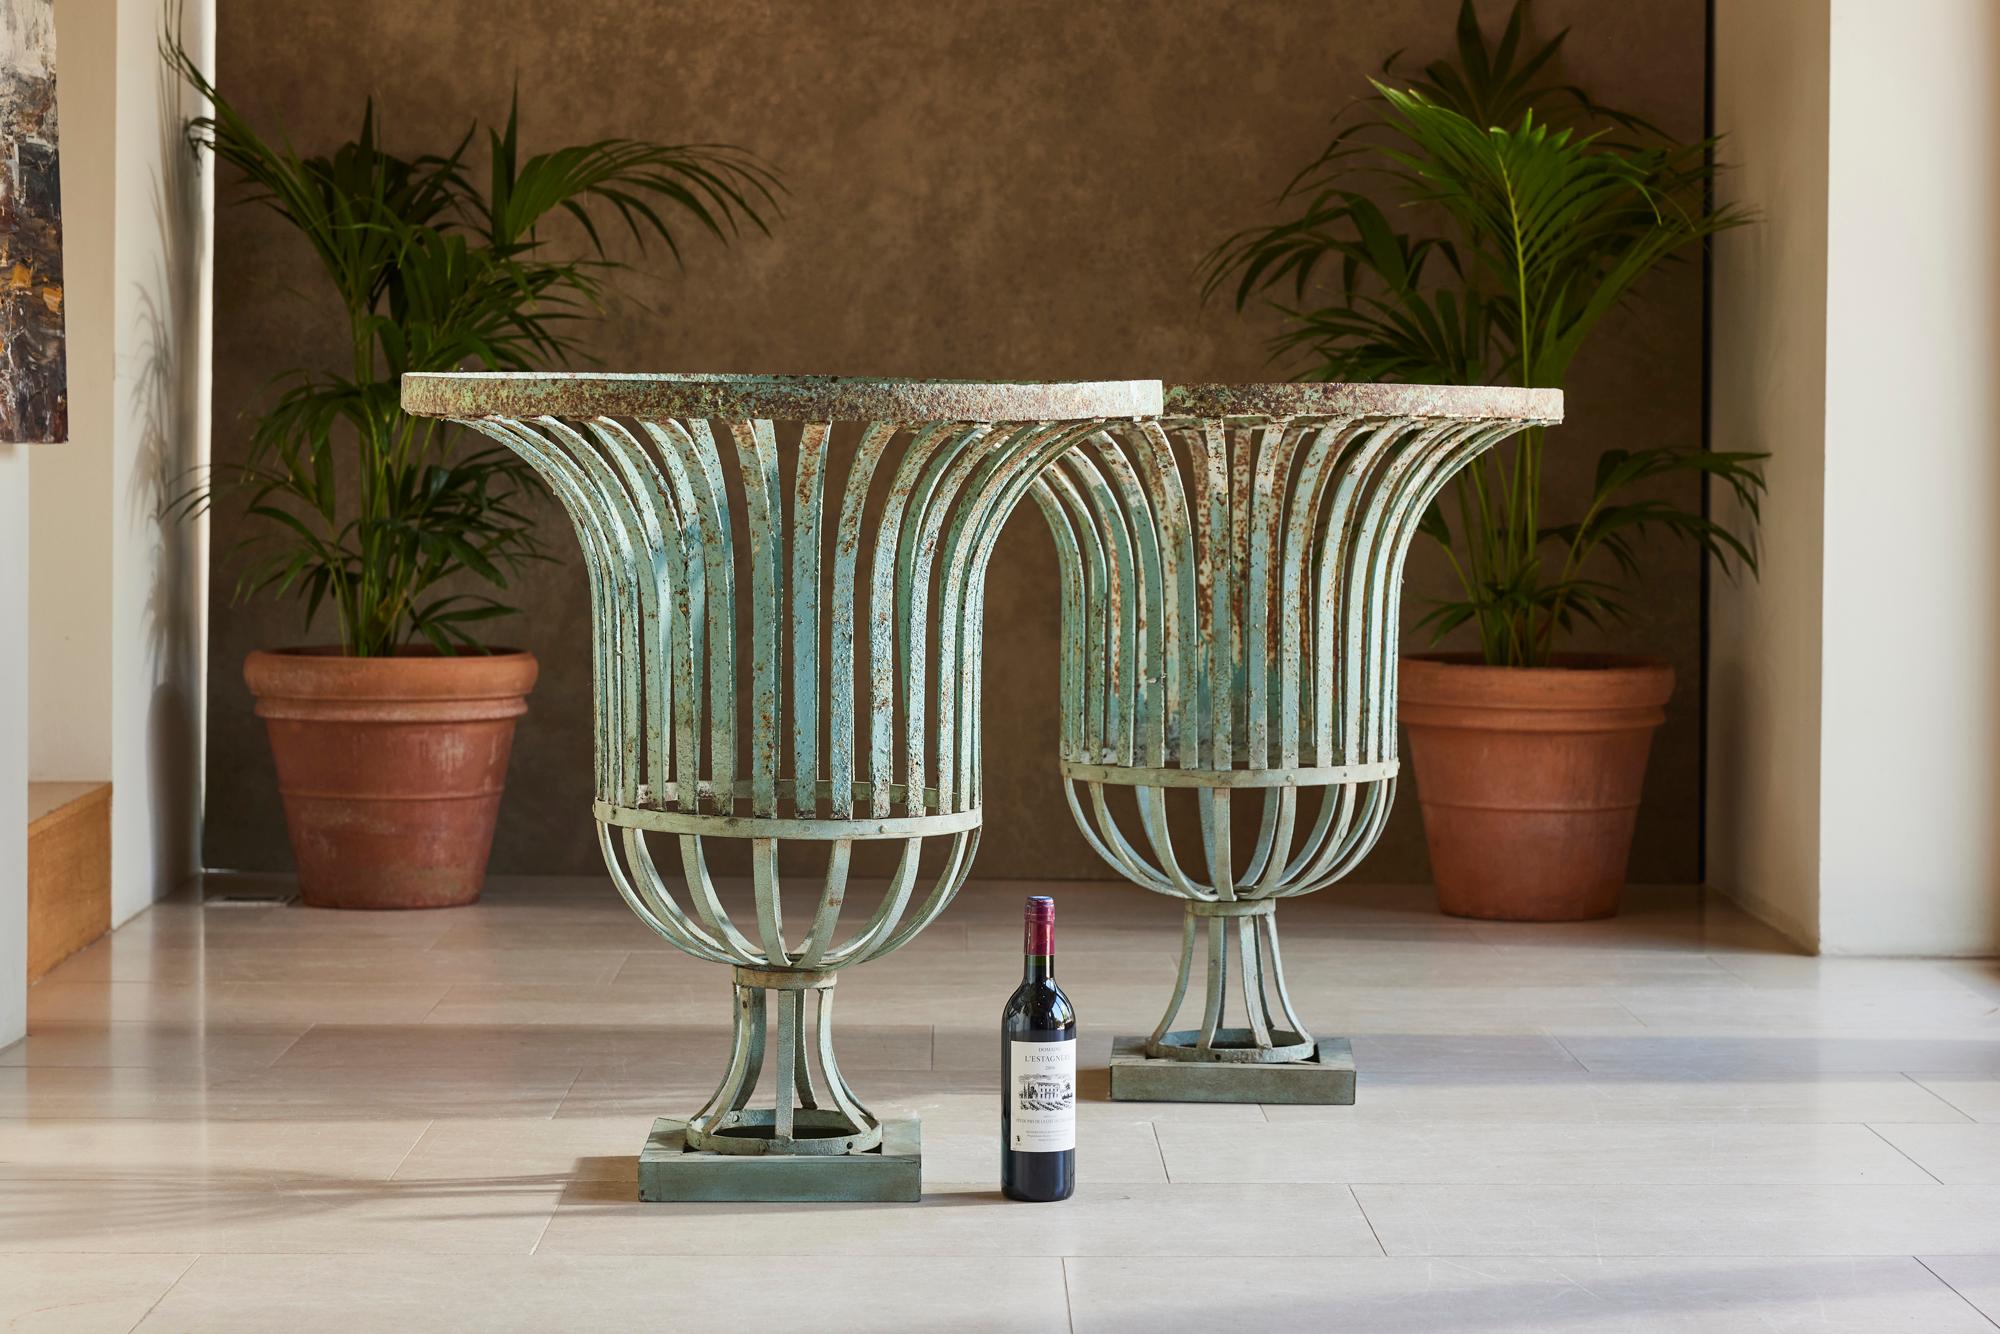 Over the years, this substantial pair of strapwork urns have developed a lovely turquoise patina. These work best when lined with moss and filled with plants. Alternatively, they are architectural pieces in their own right and could be a very